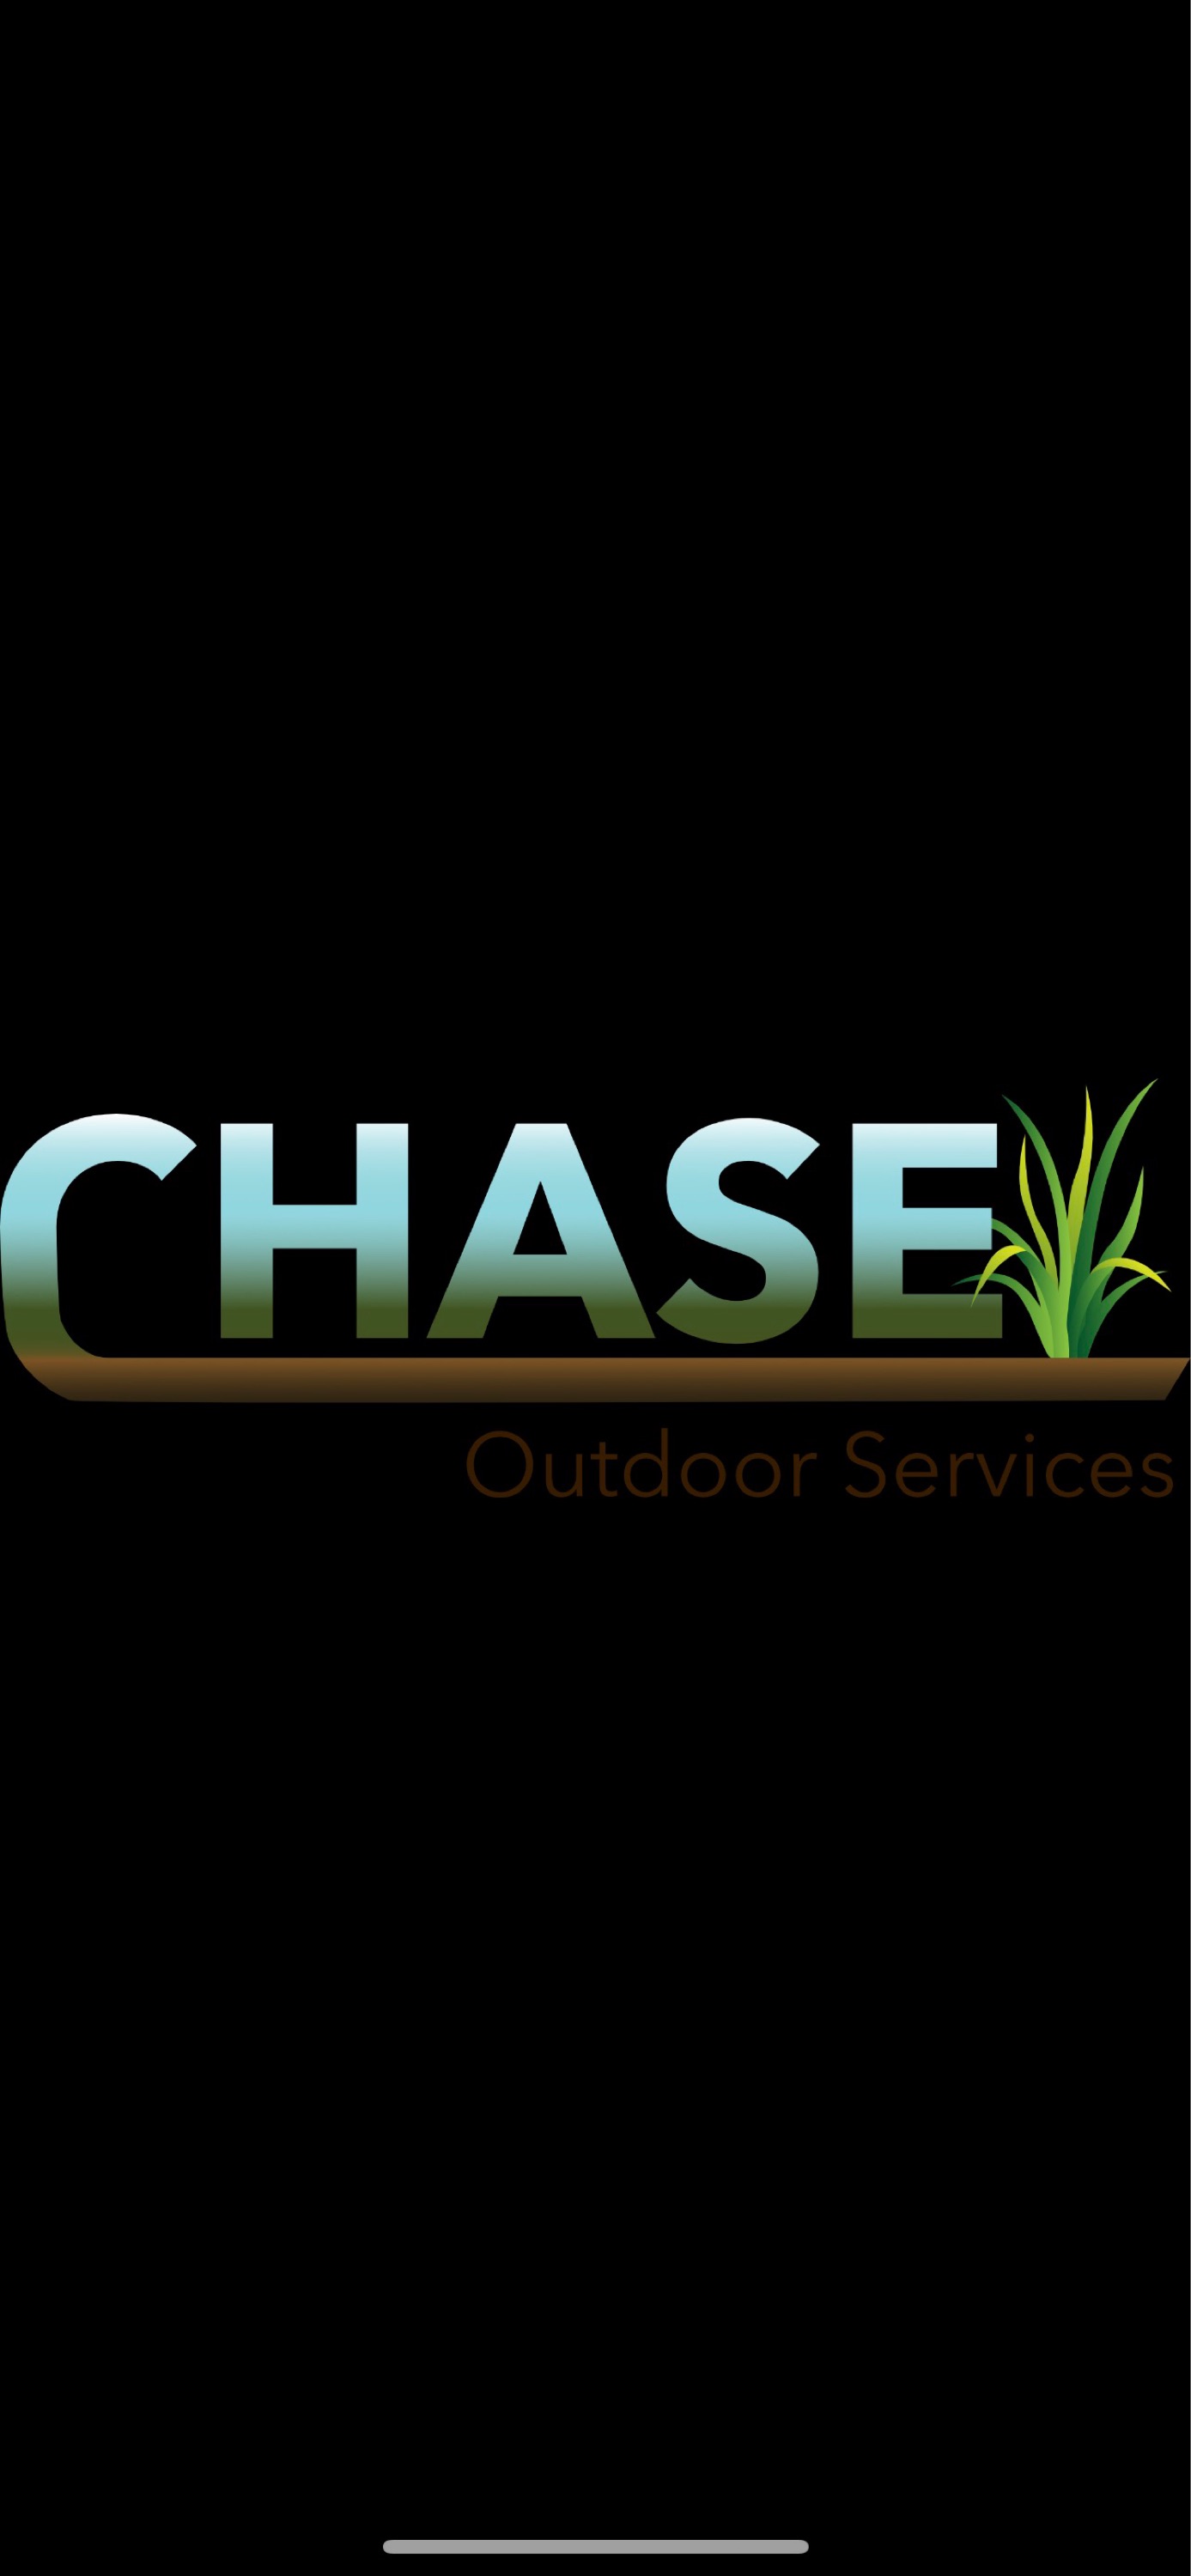 CHASE Outdoor Services Logo